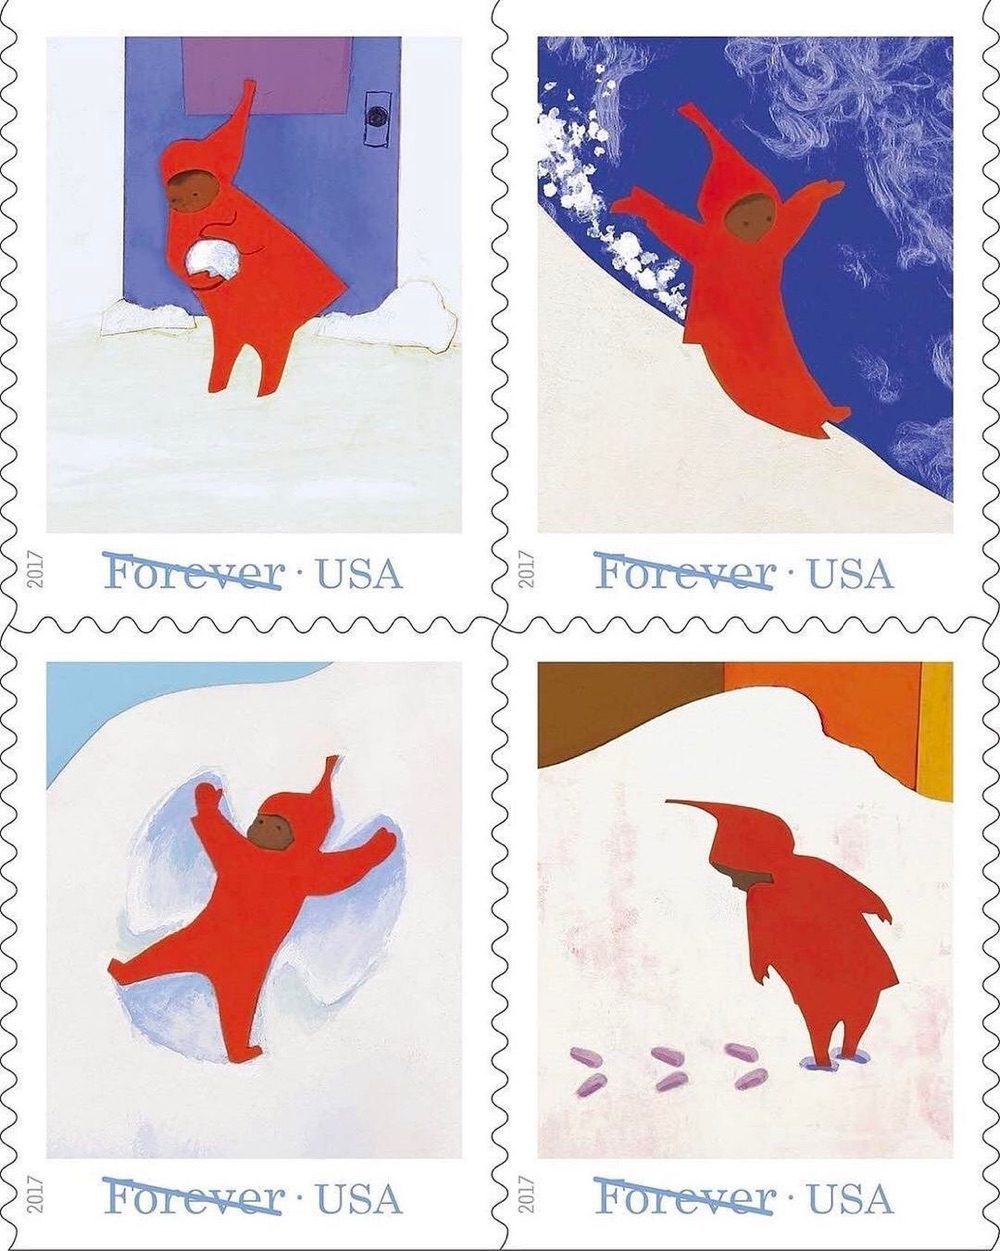 four USPS stamps featuring the boy from The Snowy Day by Ezra Jack Keats